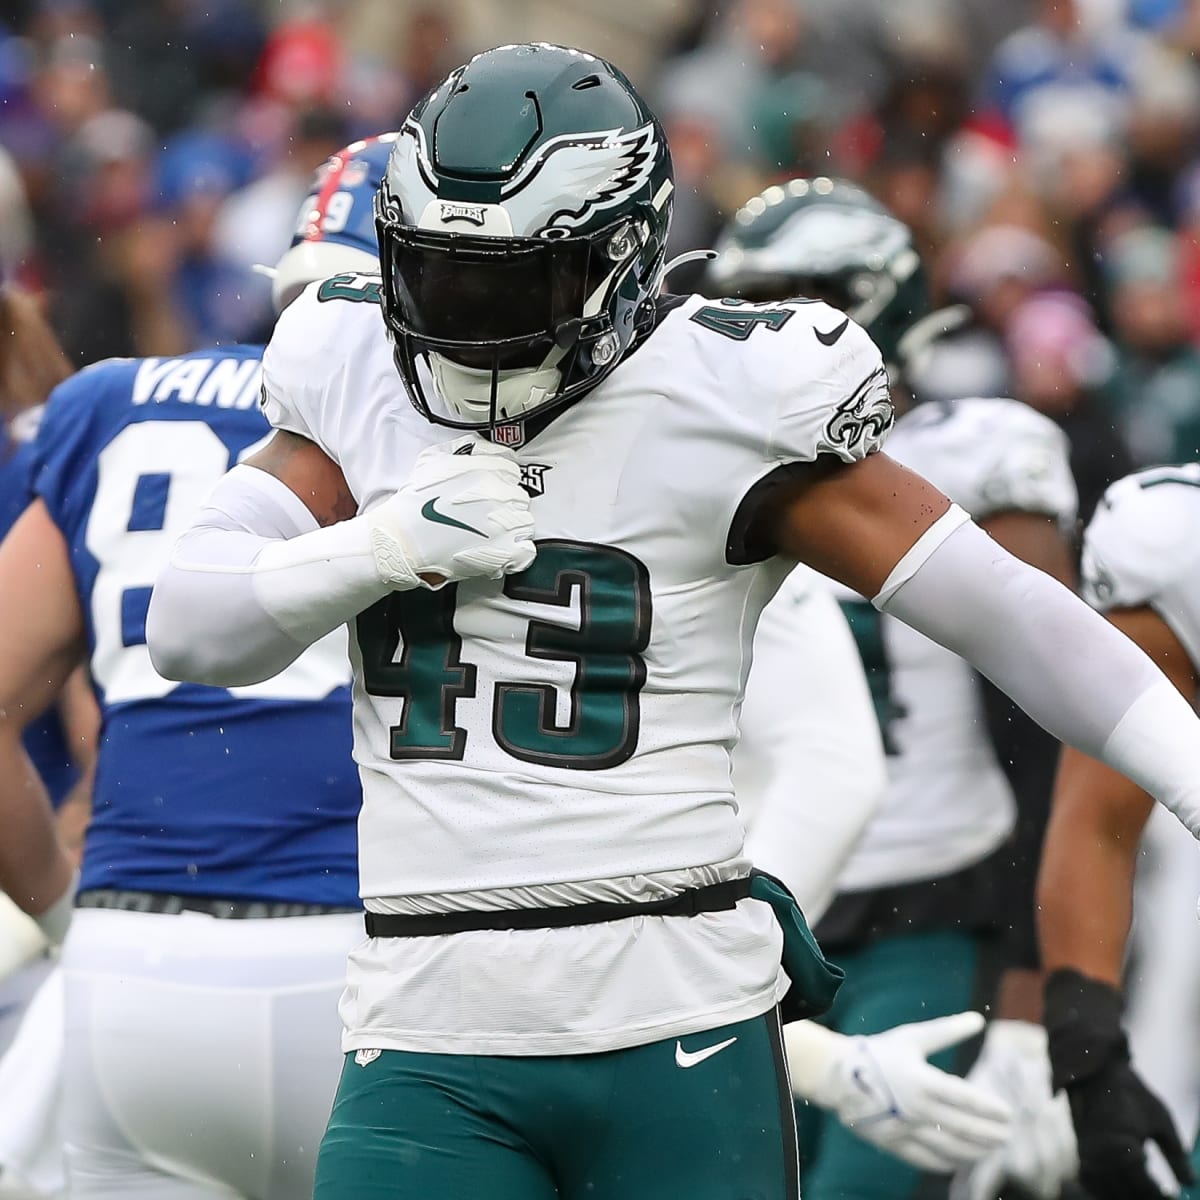 This is where I wanted to be': How new Eagles linebacker Kyzir